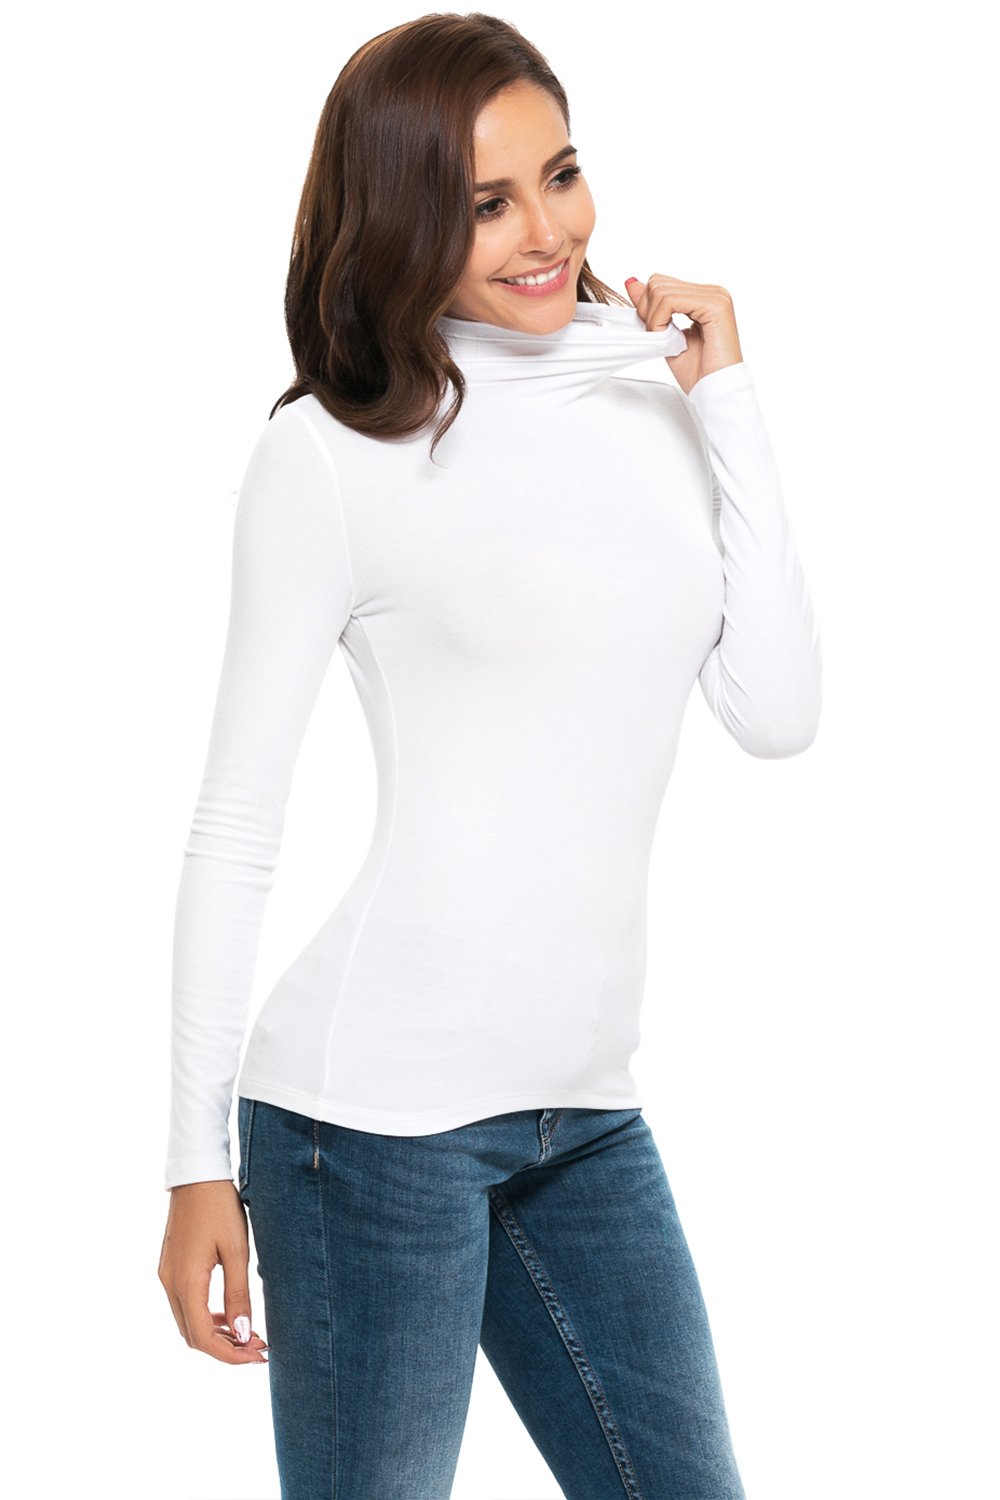 Womens Long Sleeve/Sleeveless Mock Turtleneck Stretch Fitted Underscrubs Layer Tee Tops